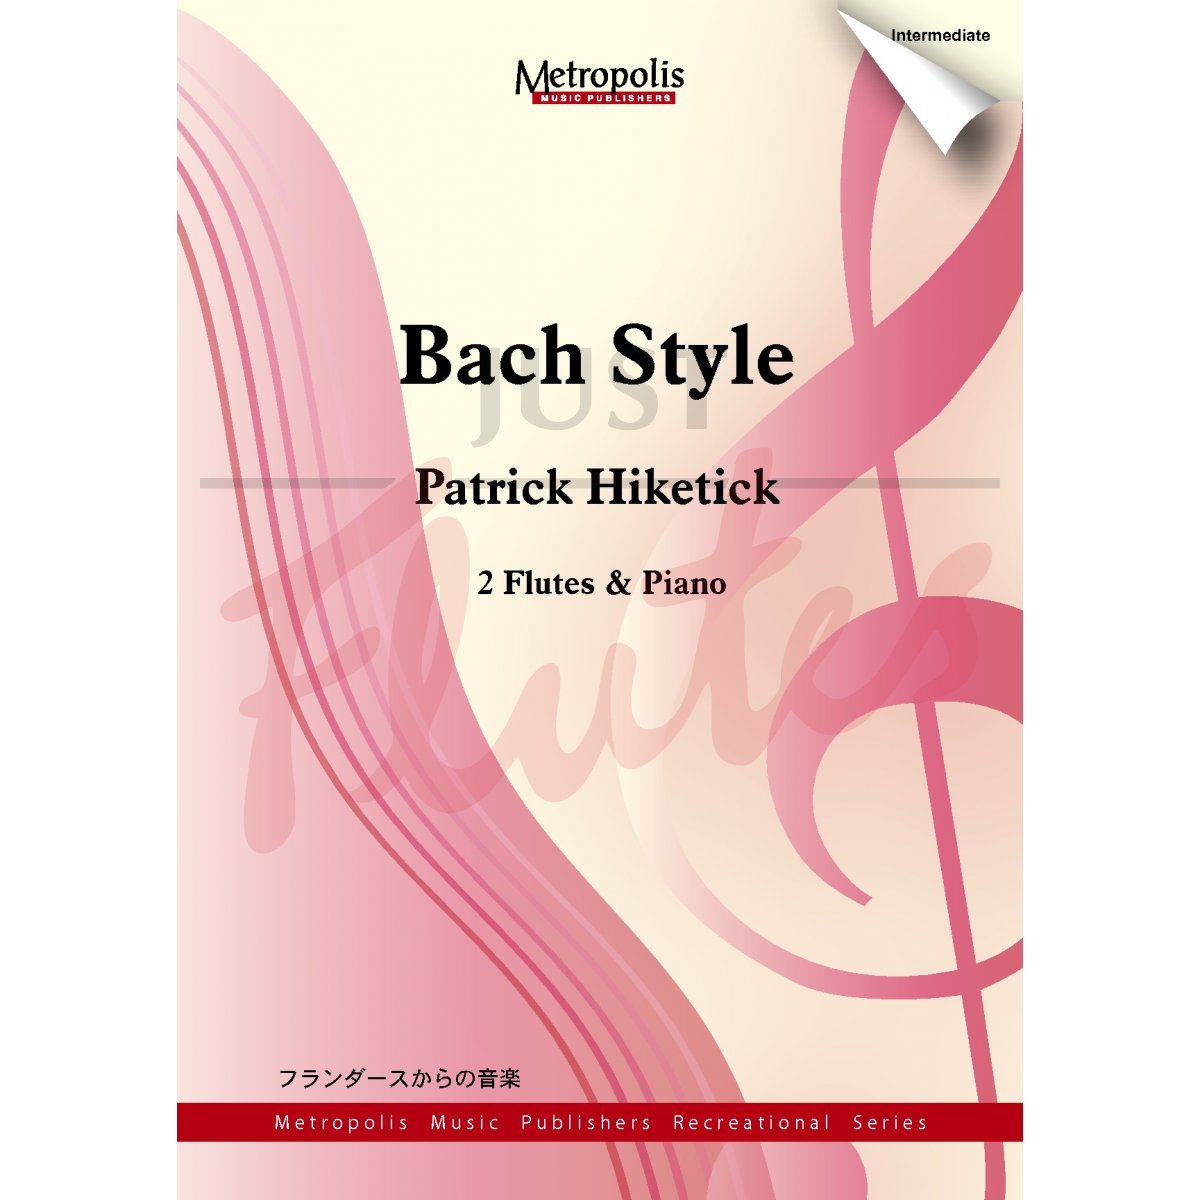 Bach Style